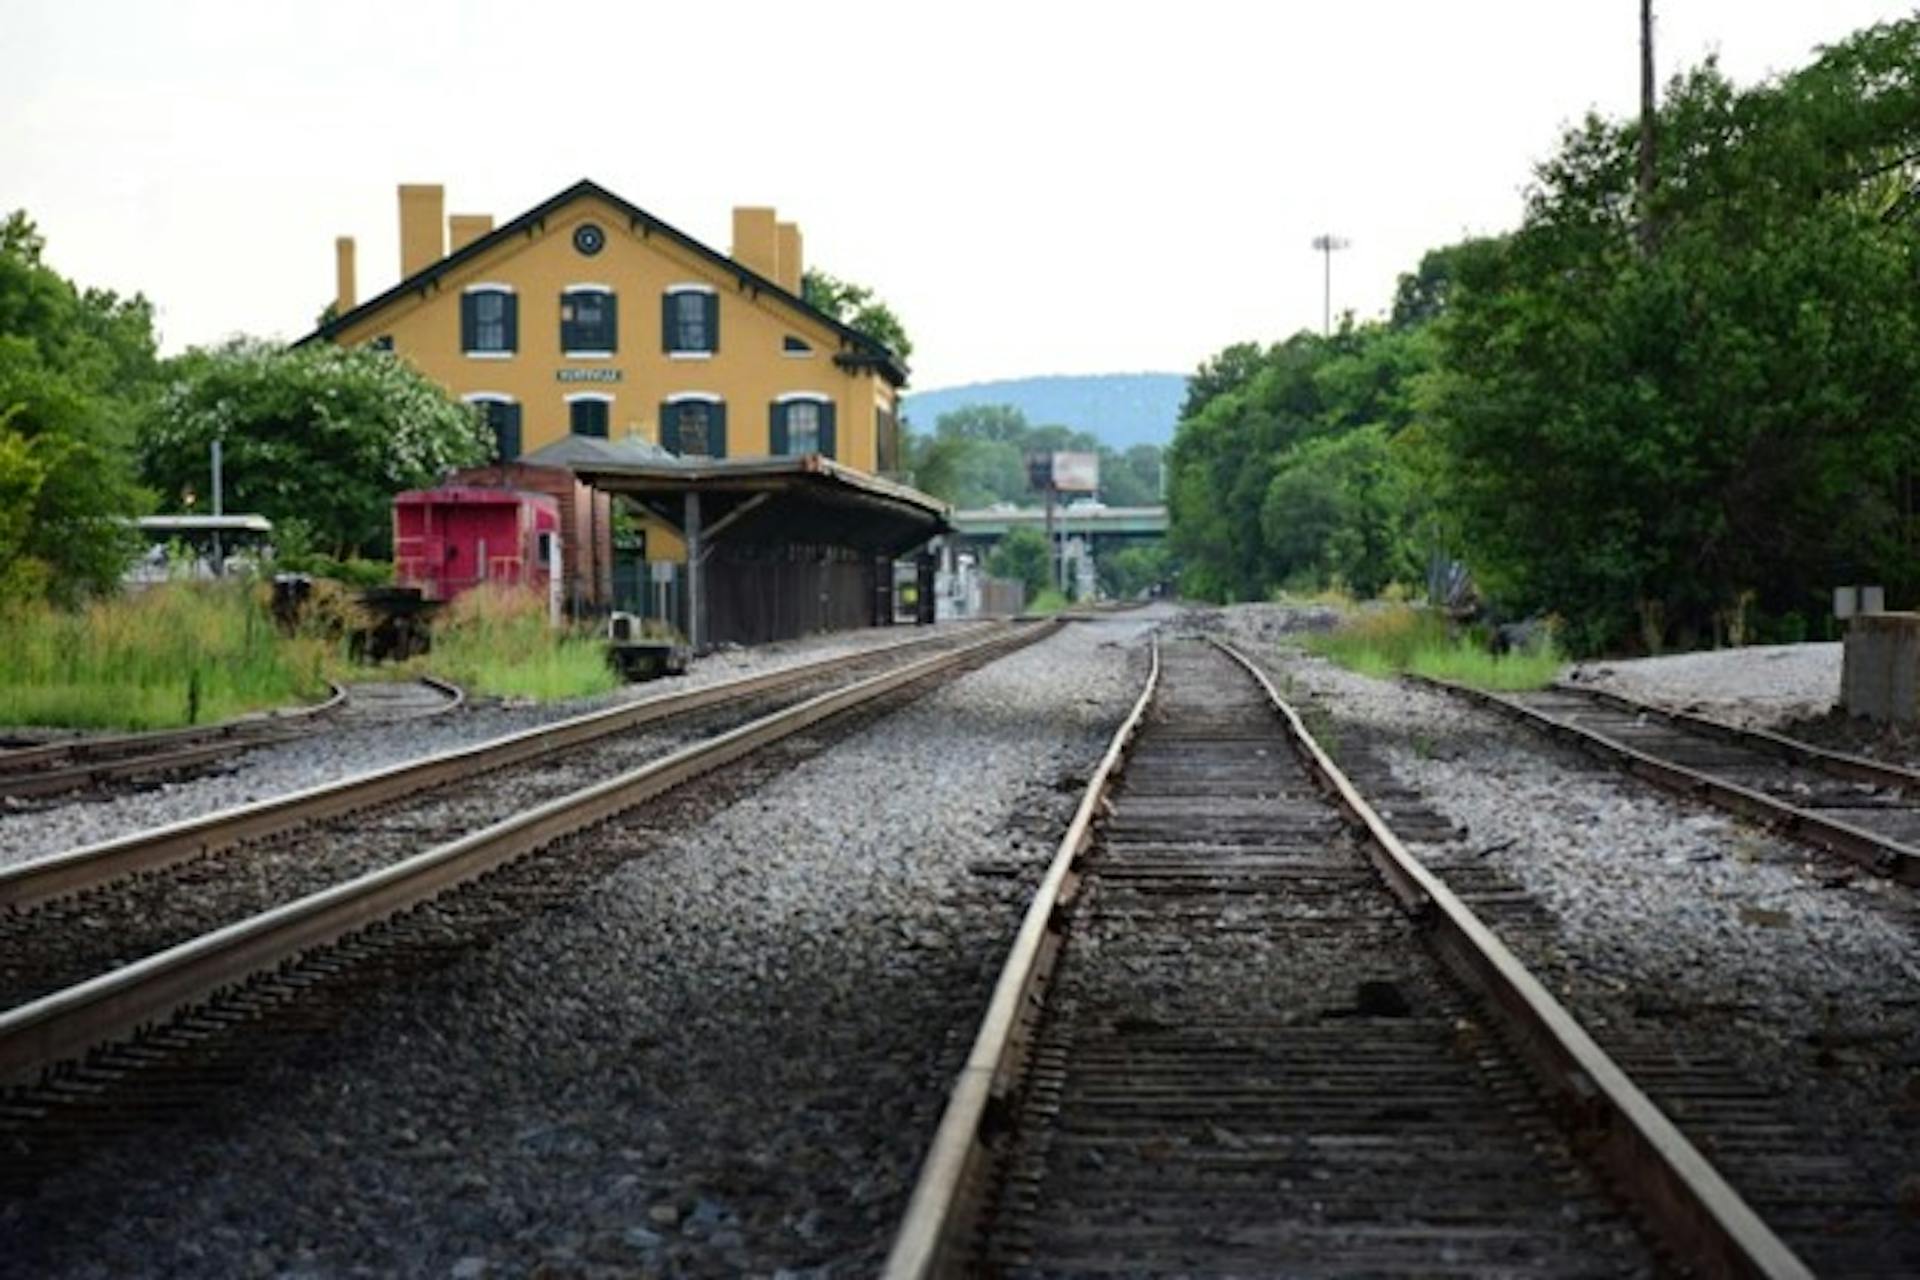 A view down the railroad tracks at and old train depot in Huntsville, AL